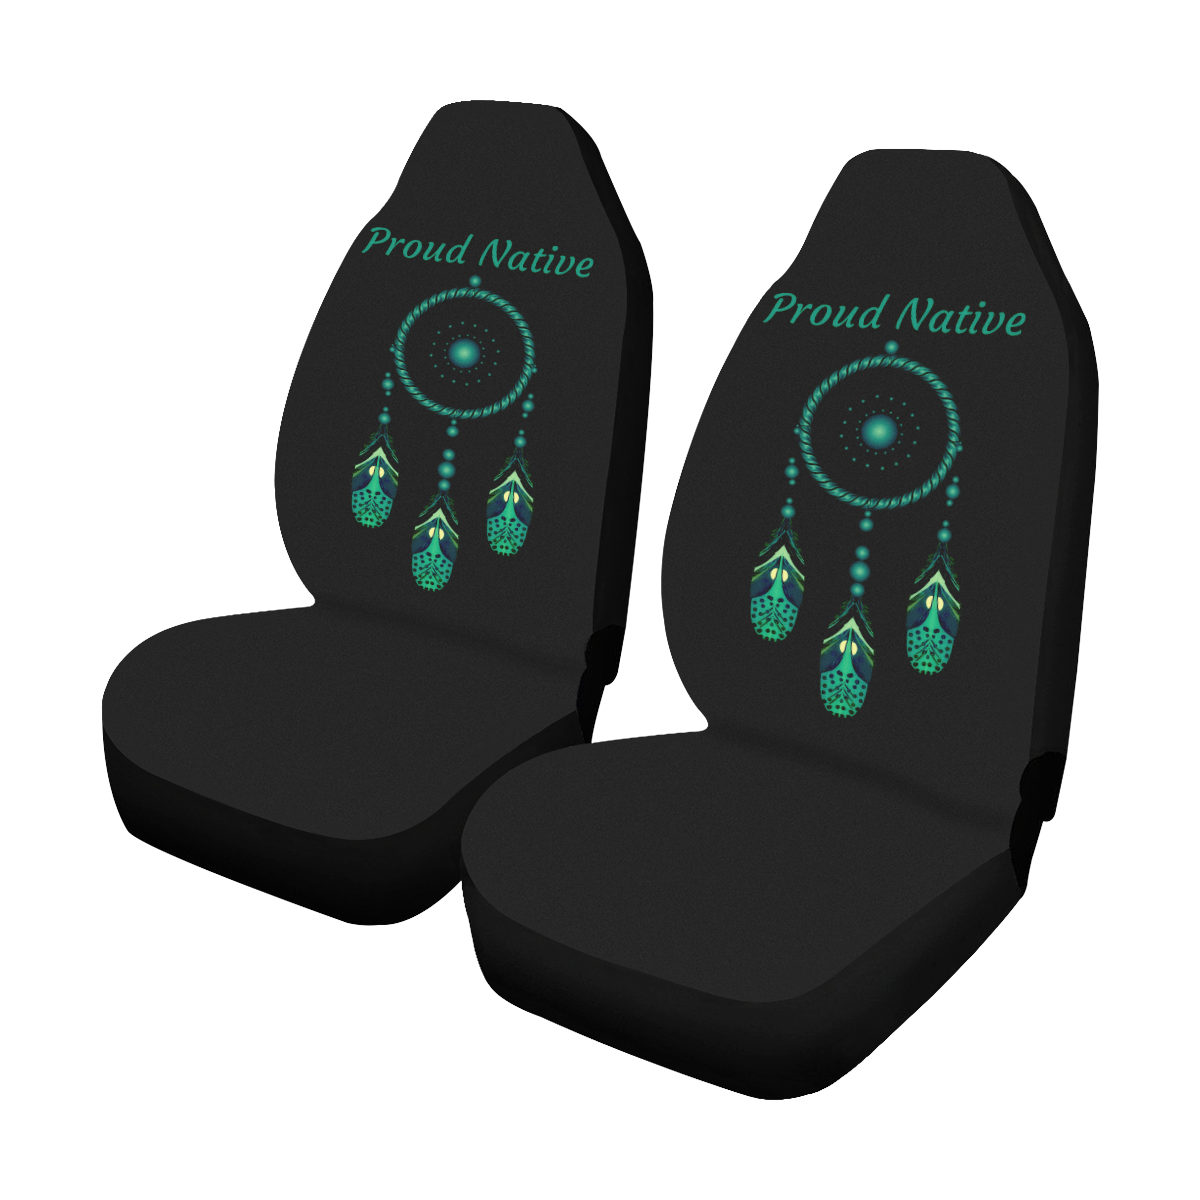 Green Proud Native Dreamcatcher Car Seat Covers (Set of 2)